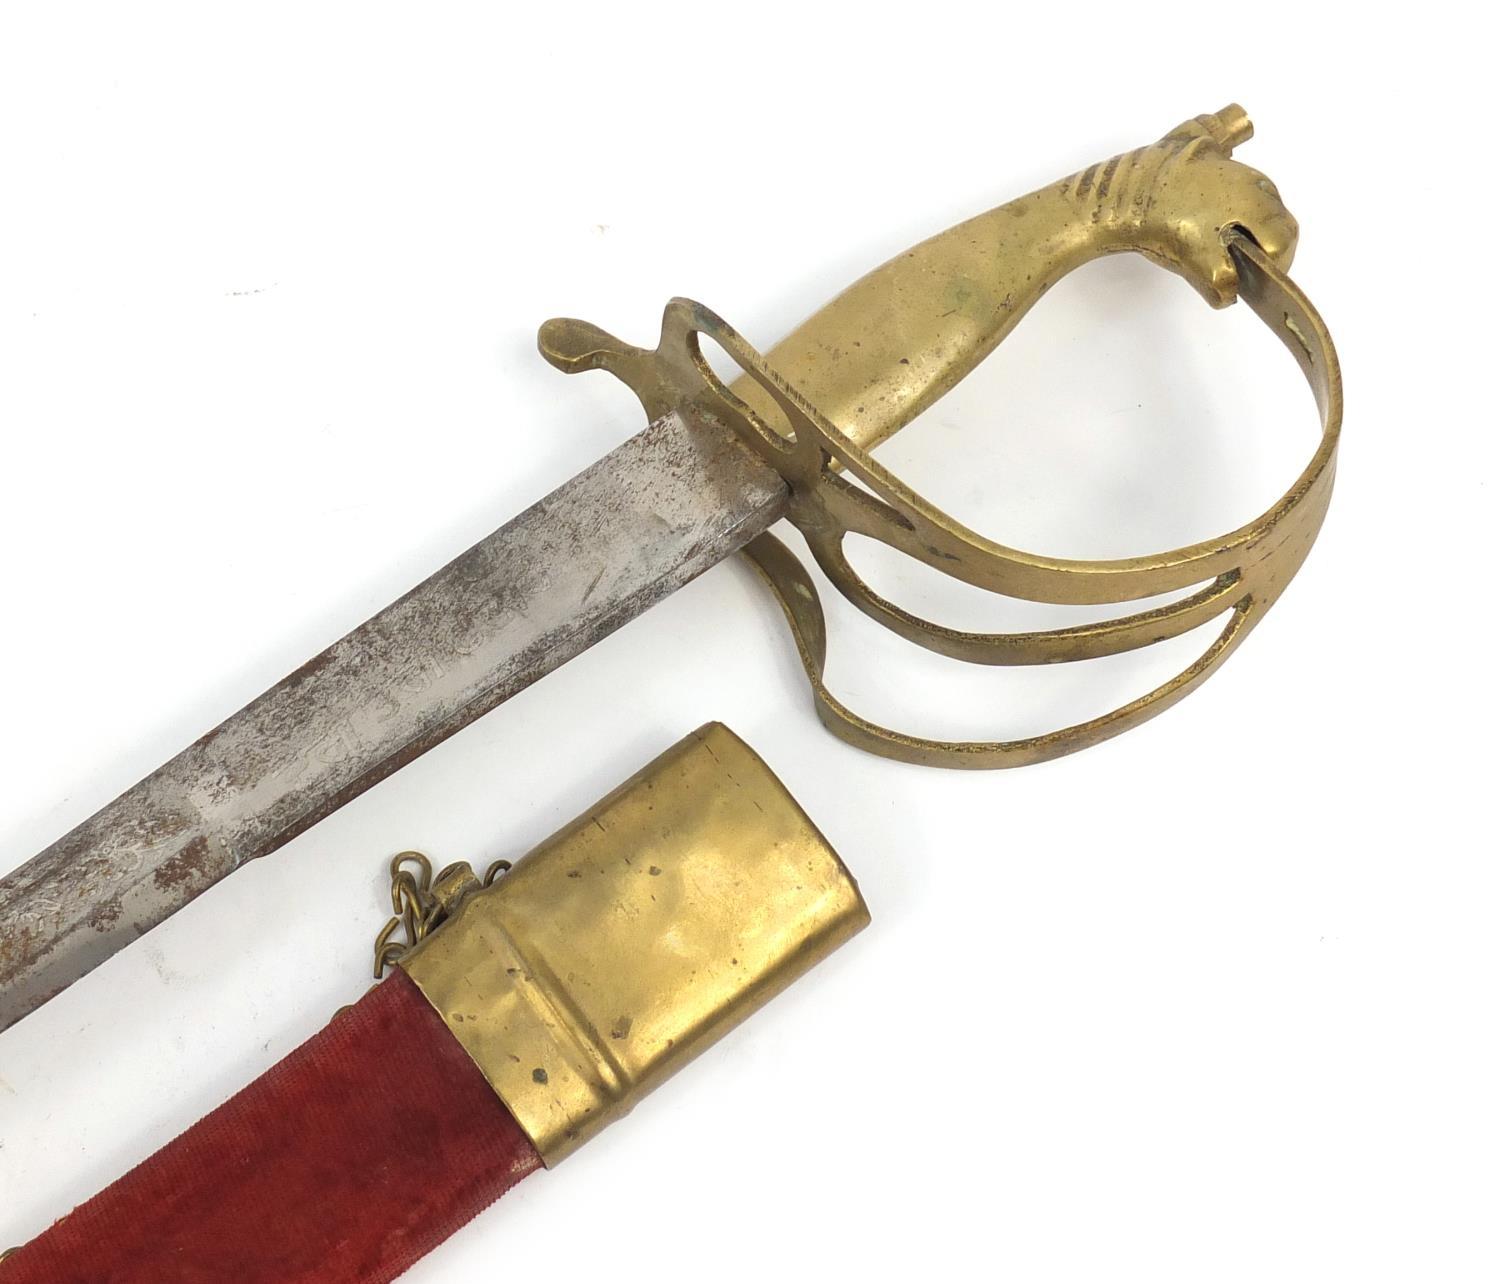 Brass ceremonial dress sword with red velvet scabbard and engraved stell blade, 96cm long : For